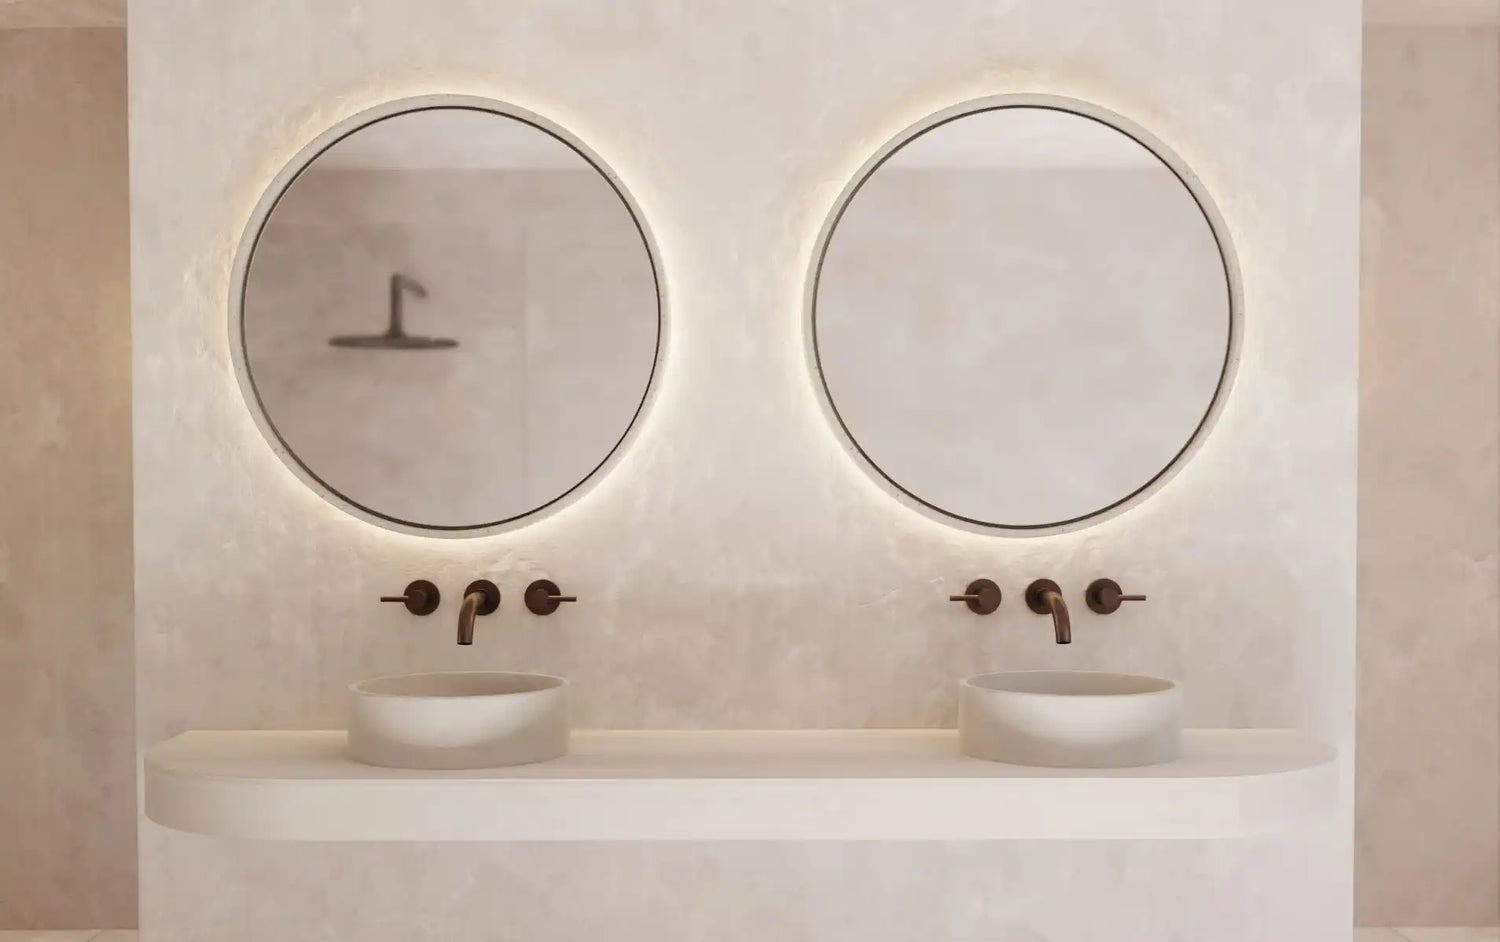 An ensuite with two Sand Comet Concrete Basins with matching large Sol Concrete Mirrors.